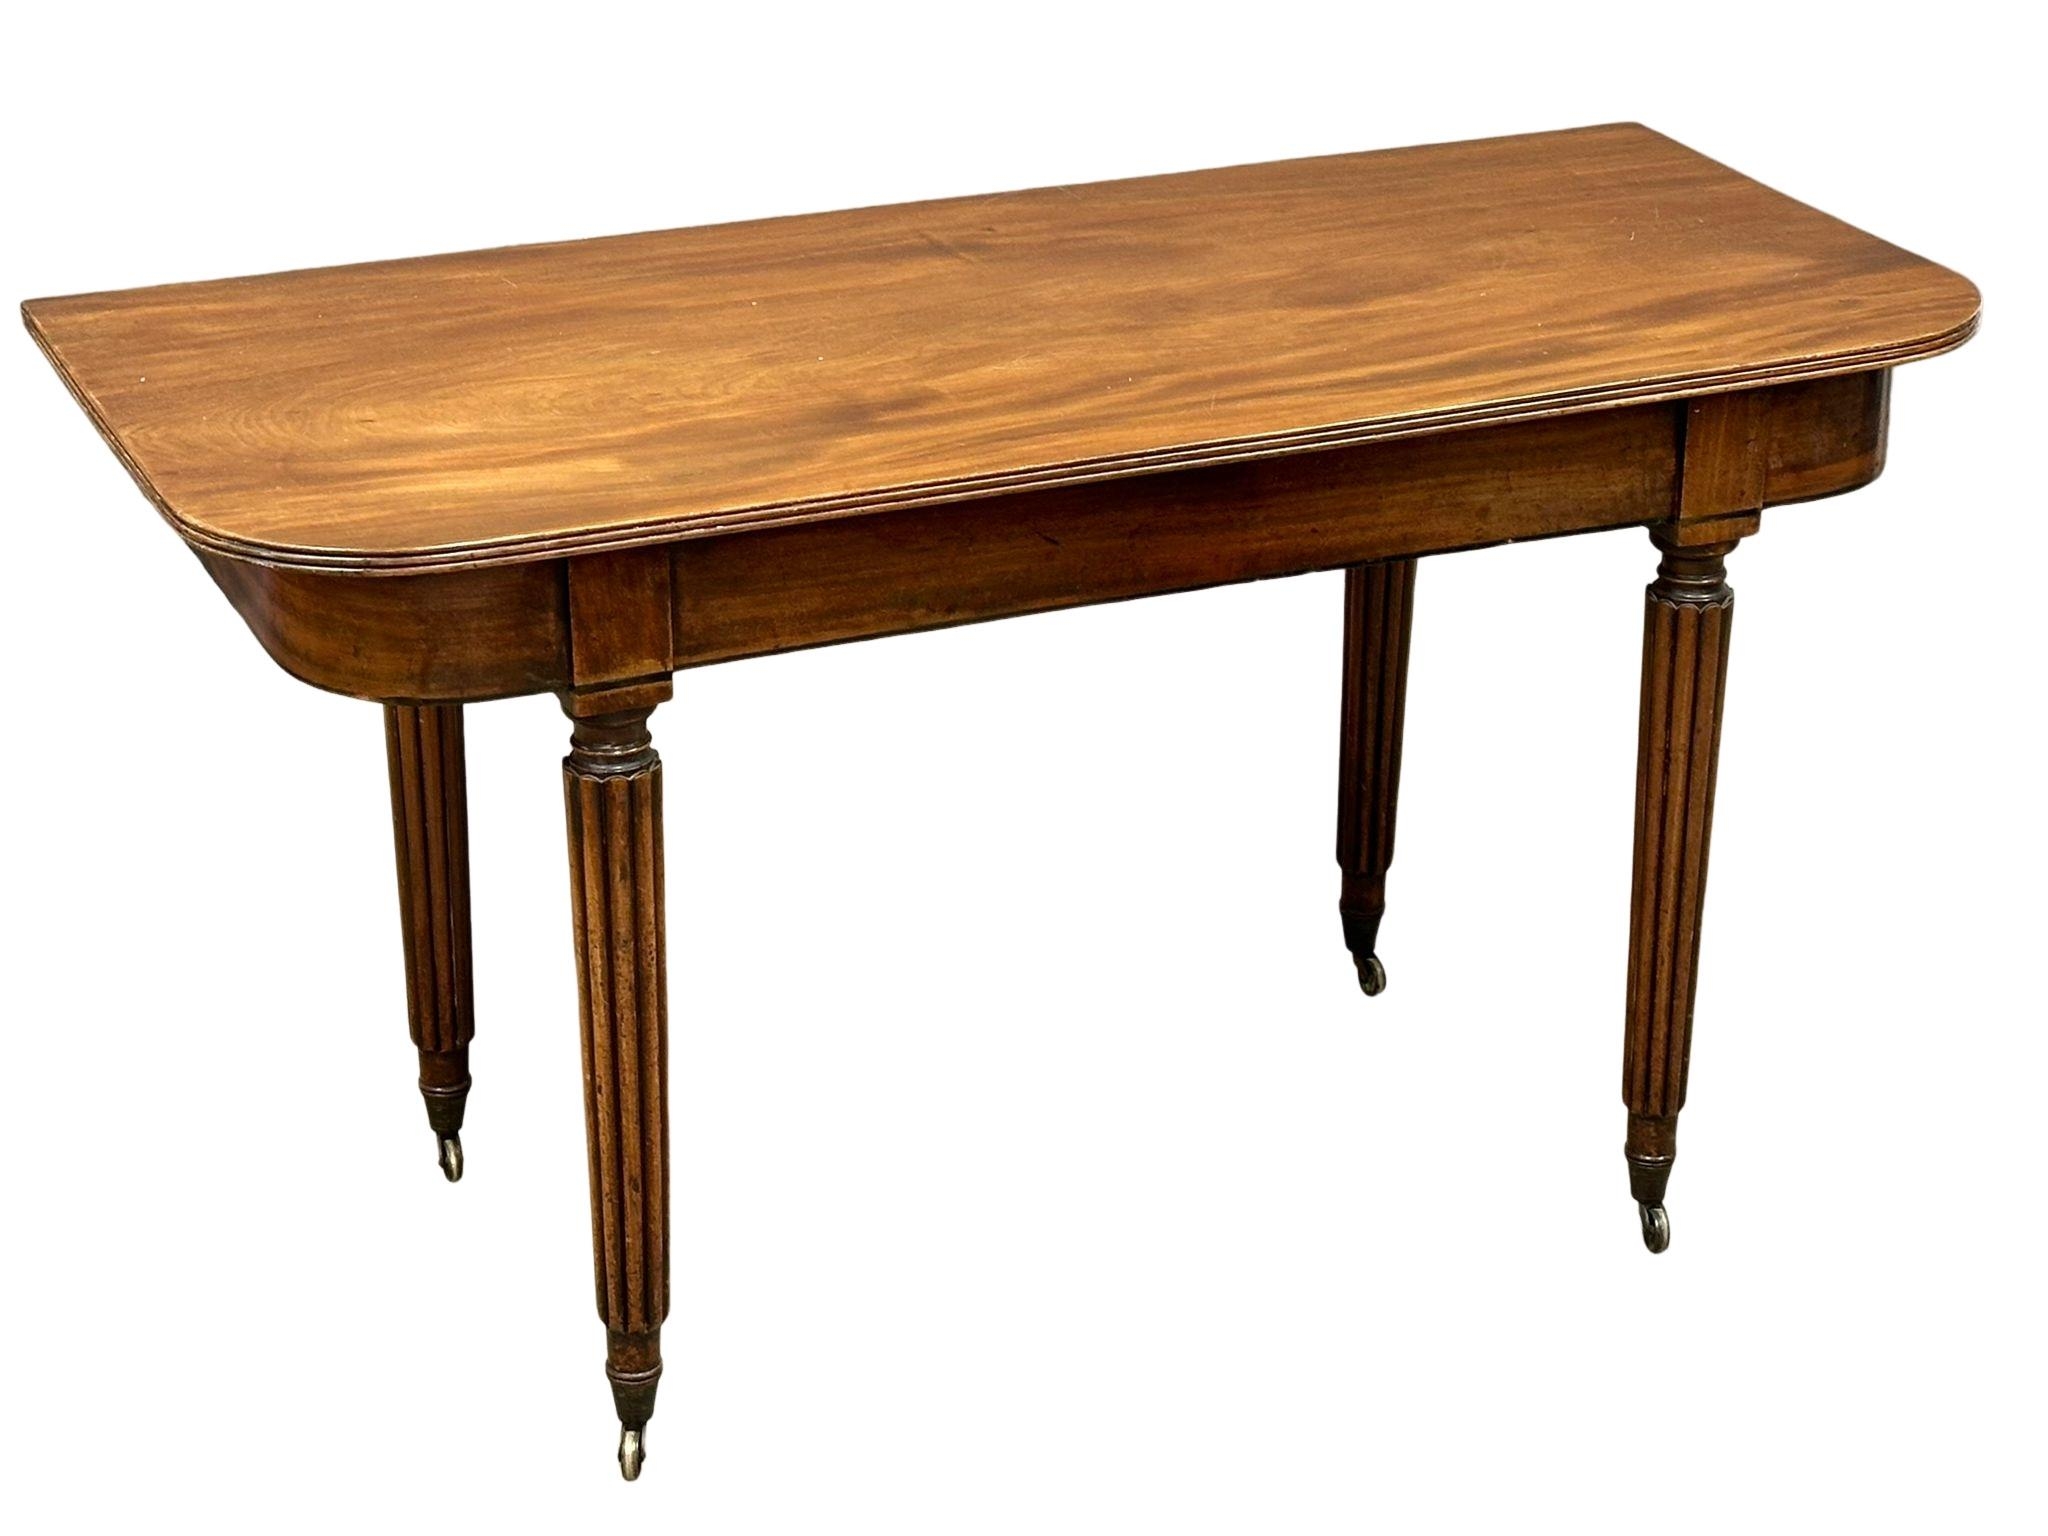 A large George IV mahogany Economy table/dining table with some later alterations. Circa 1820. 307. - Image 15 of 15